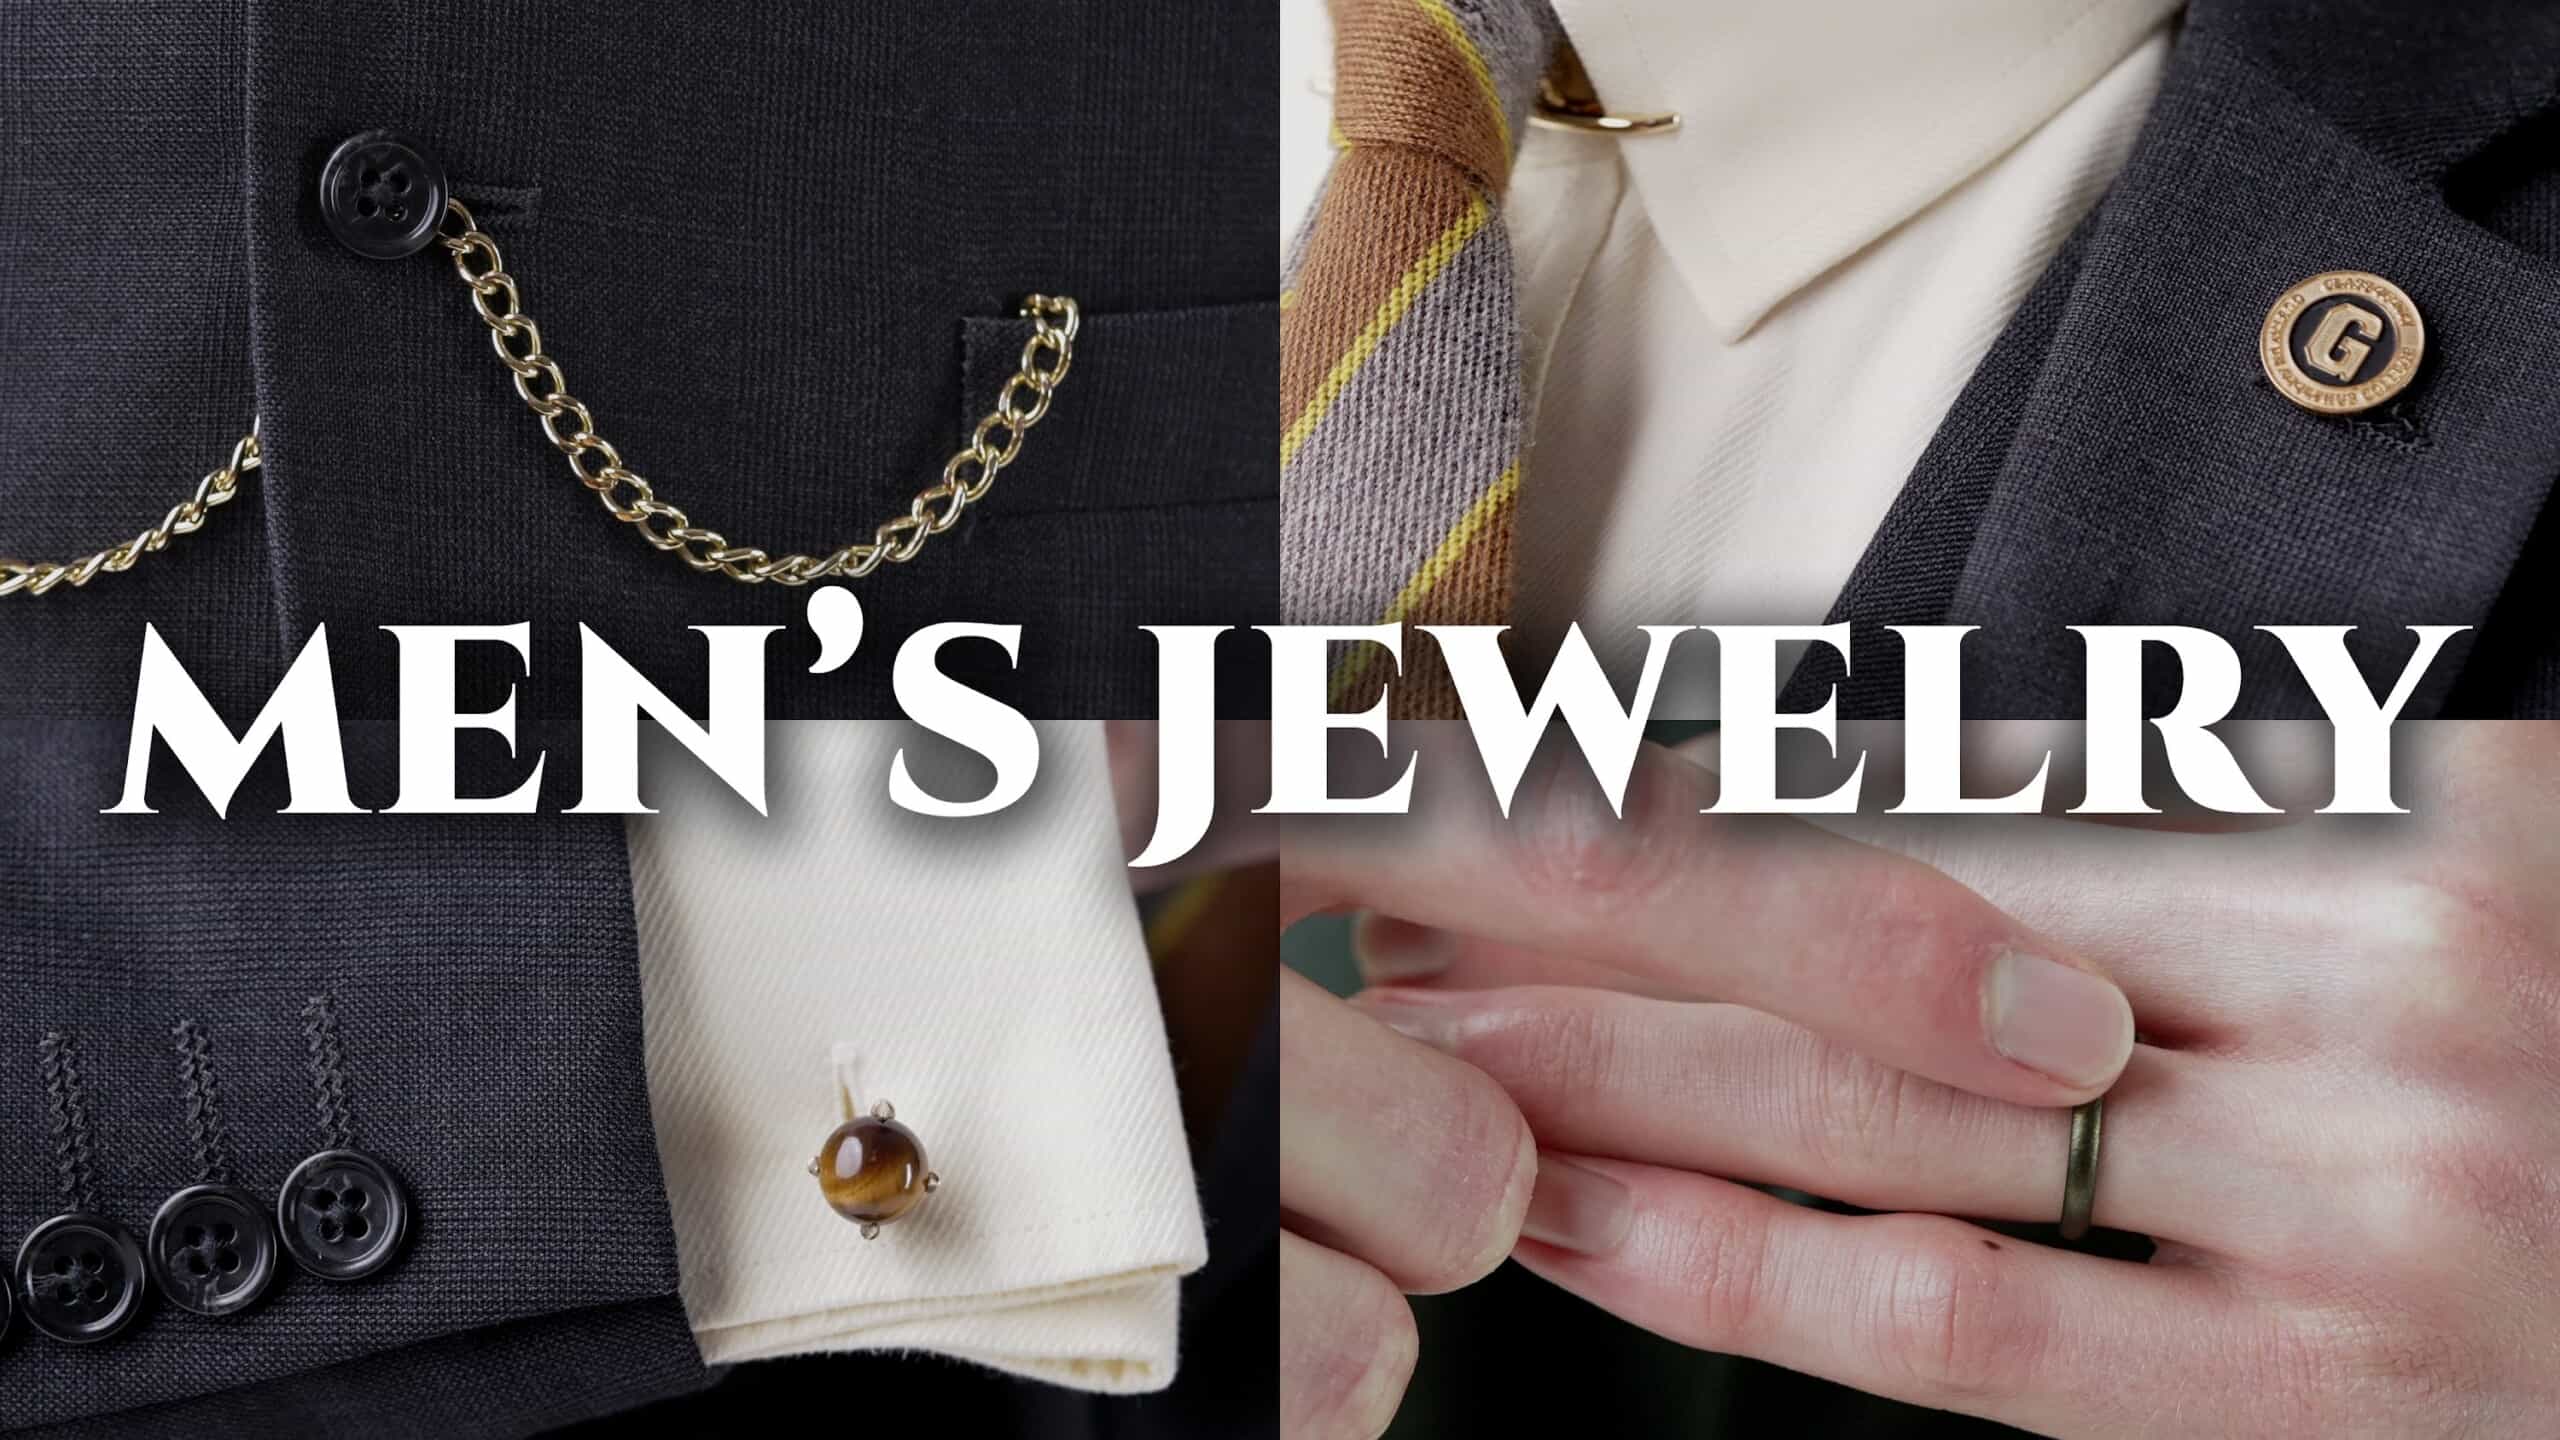 Men's Jewelry: All About Rings, Chains, & More Accessories | Gentleman's  Gazette